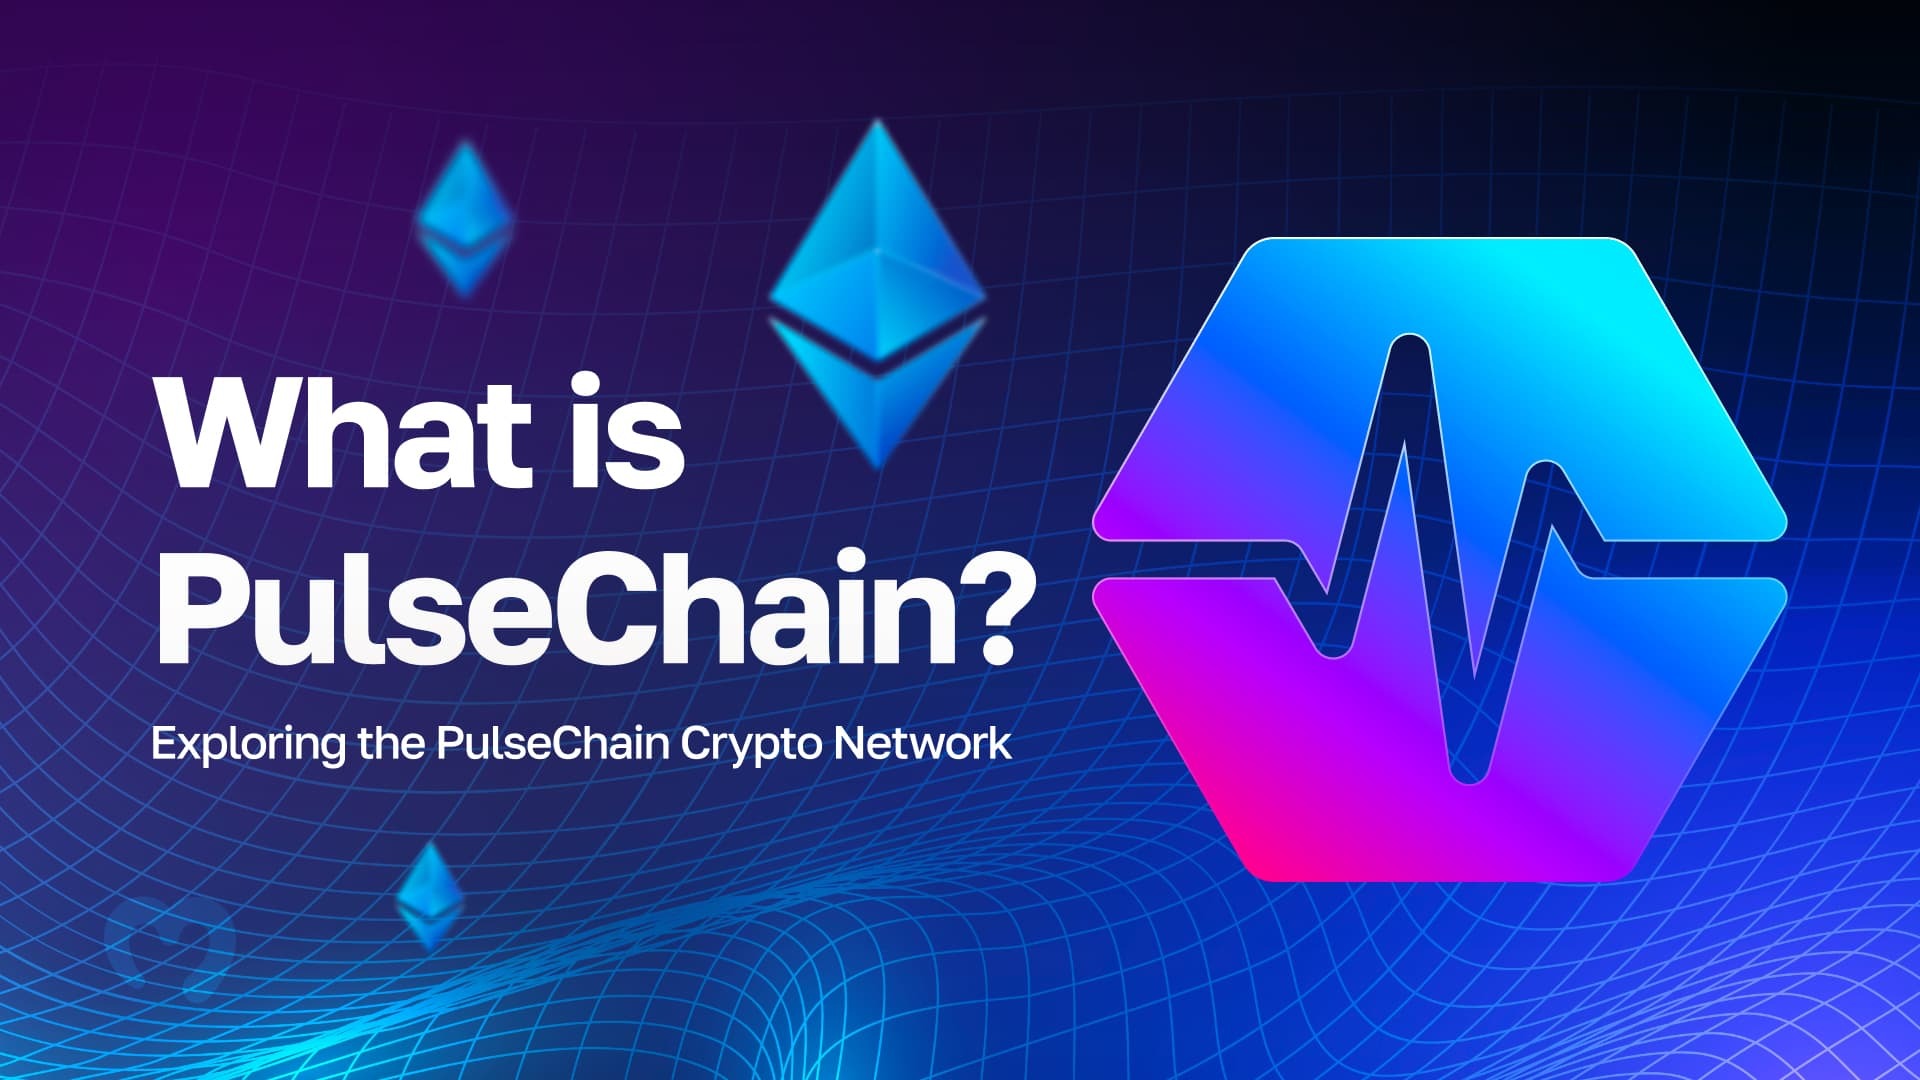 23_02_What-is-PulseChain-Exploring-the-PulseChain-Crypto-Network